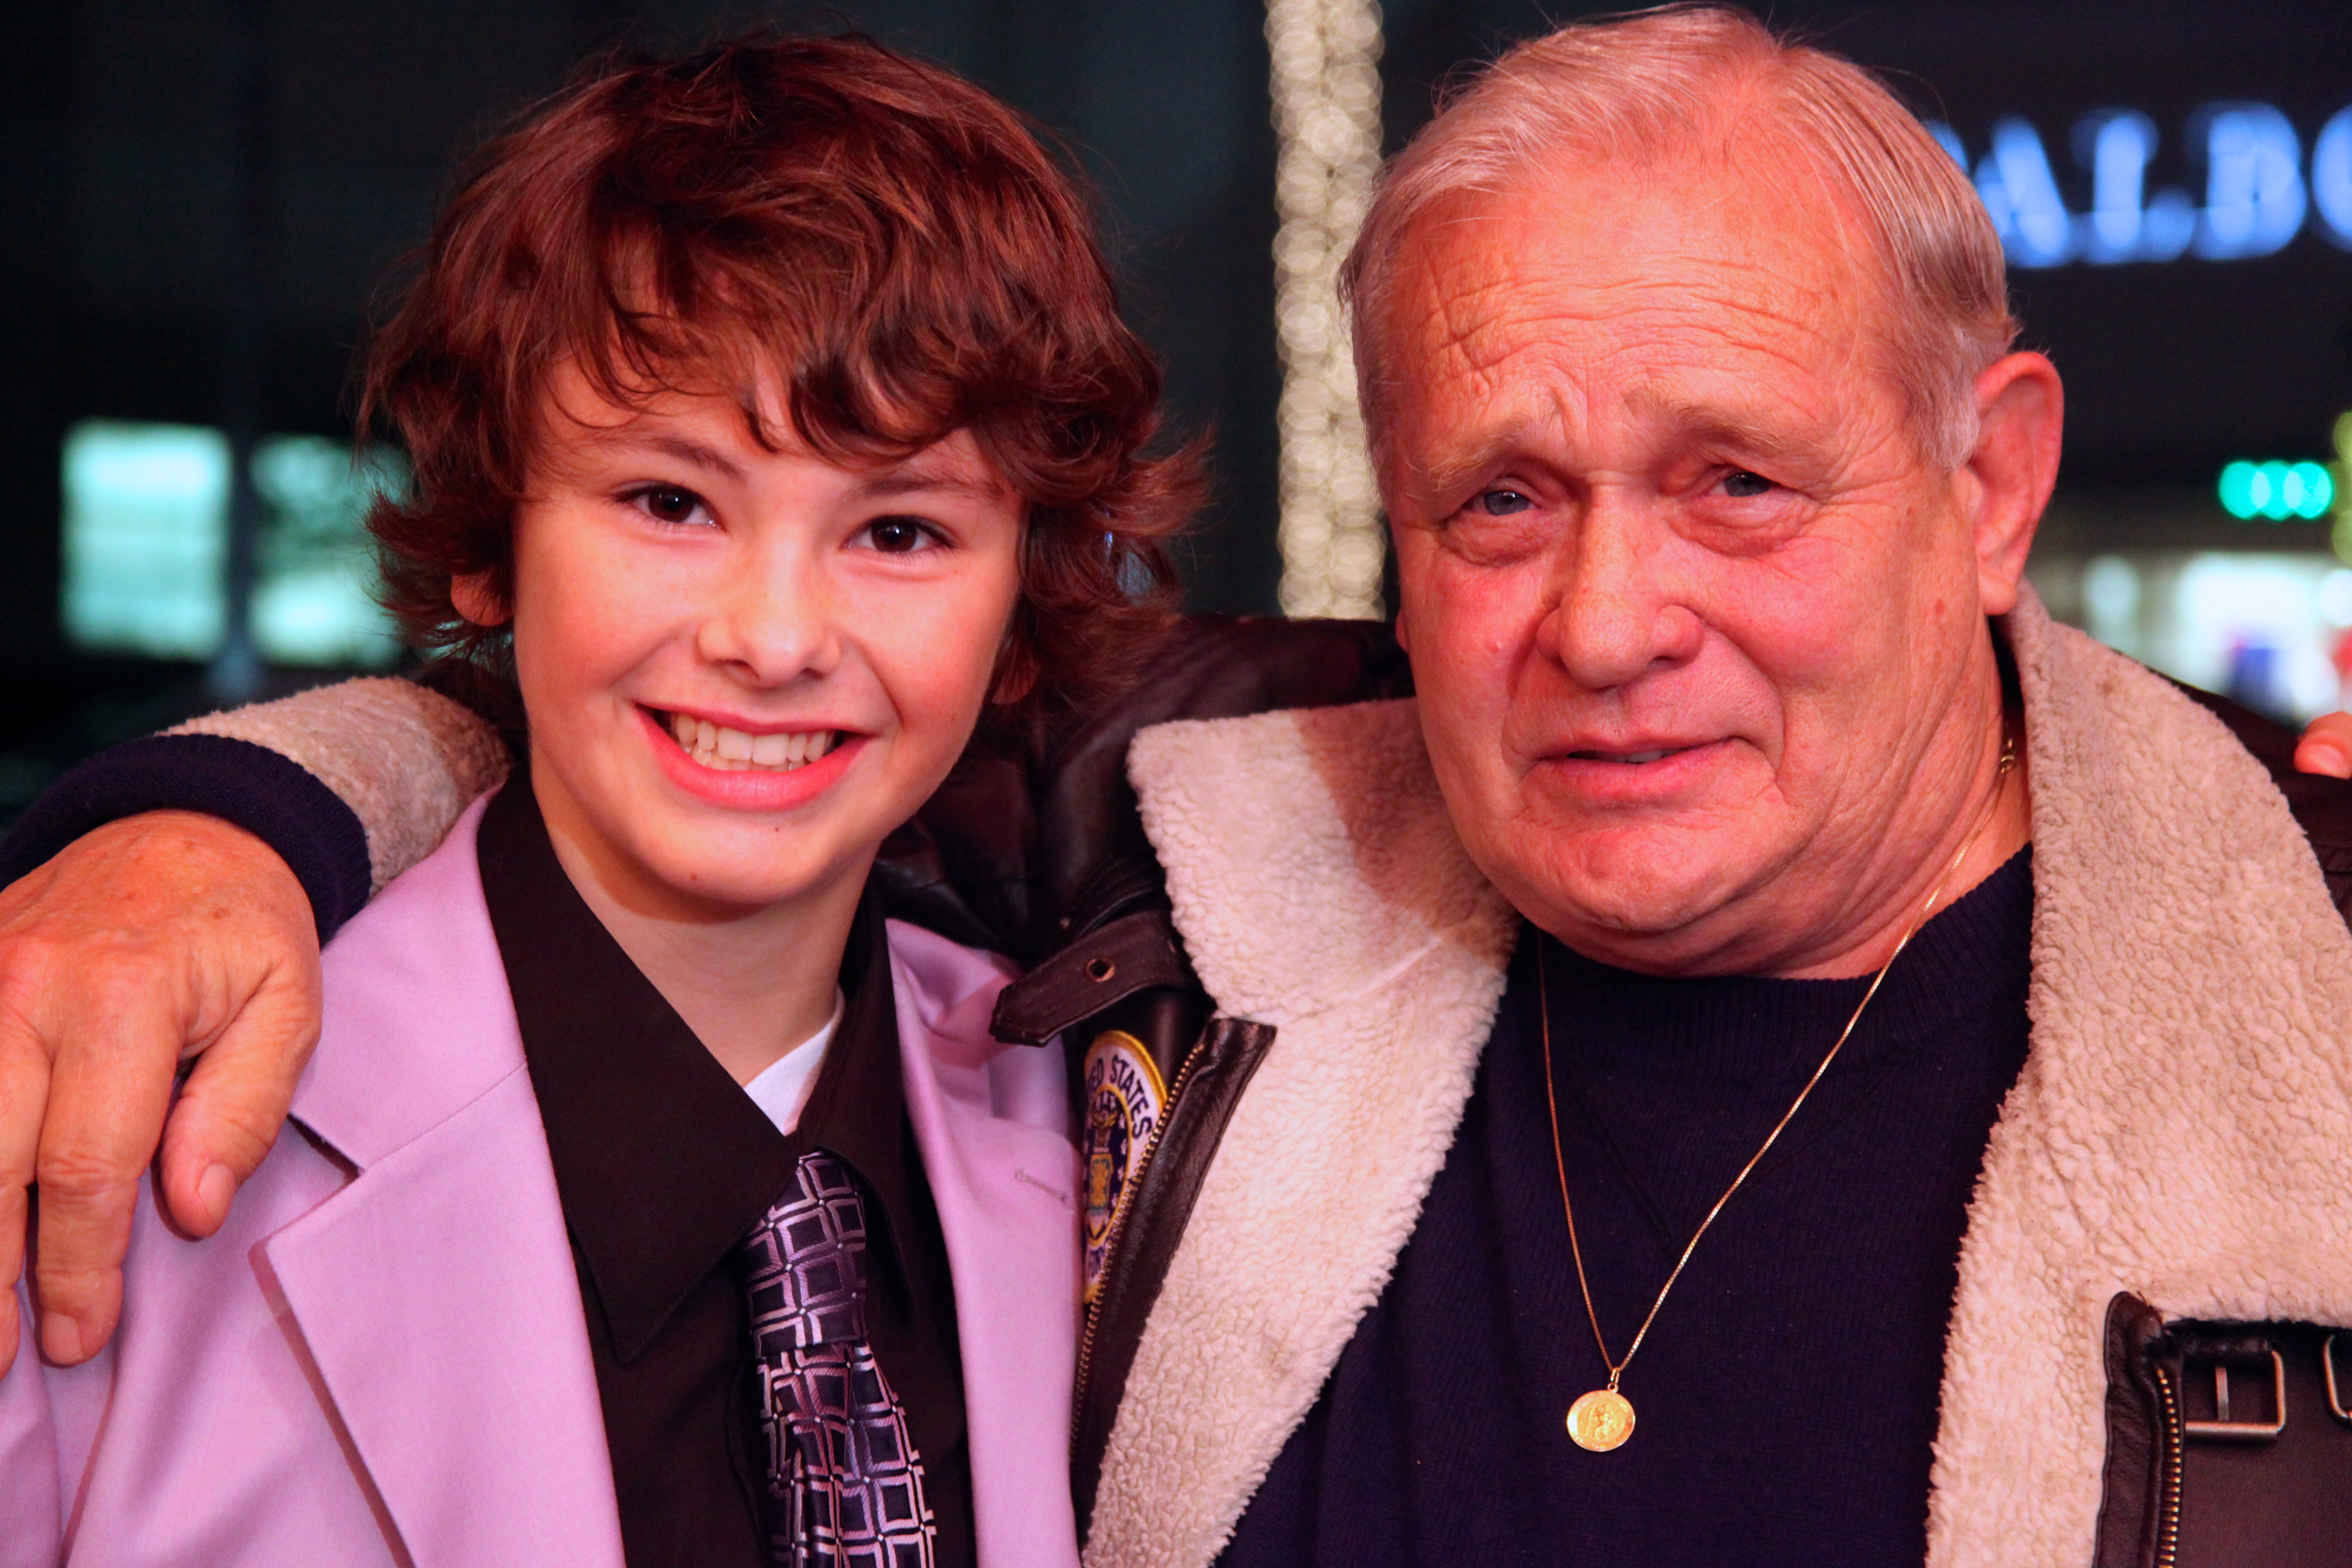 Landon Brooks and Bo Hopkins at the red carpet premiere of 